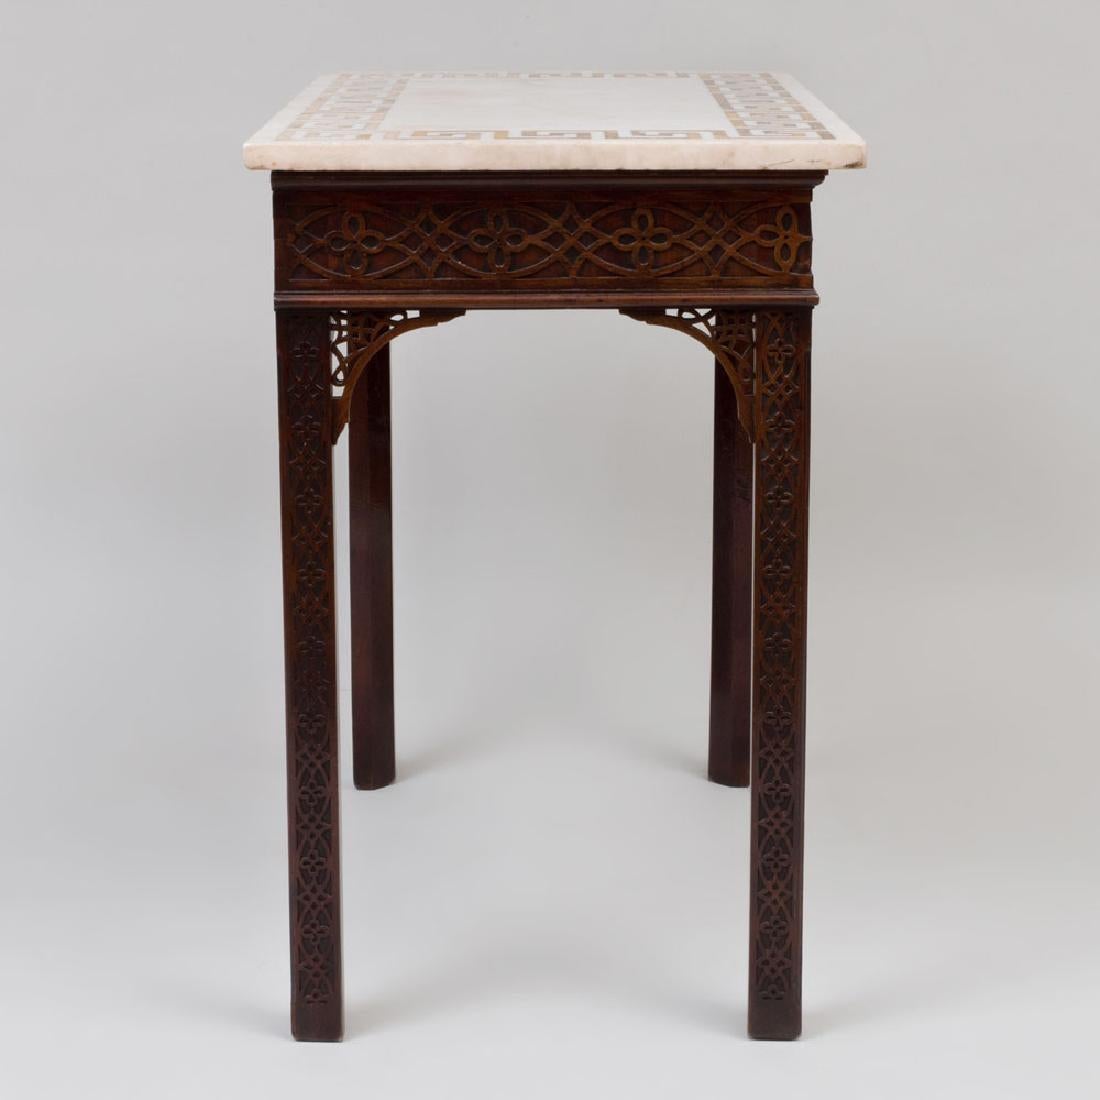 English George III Period Mahogany Fratework Marble-Top Console Table For Sale